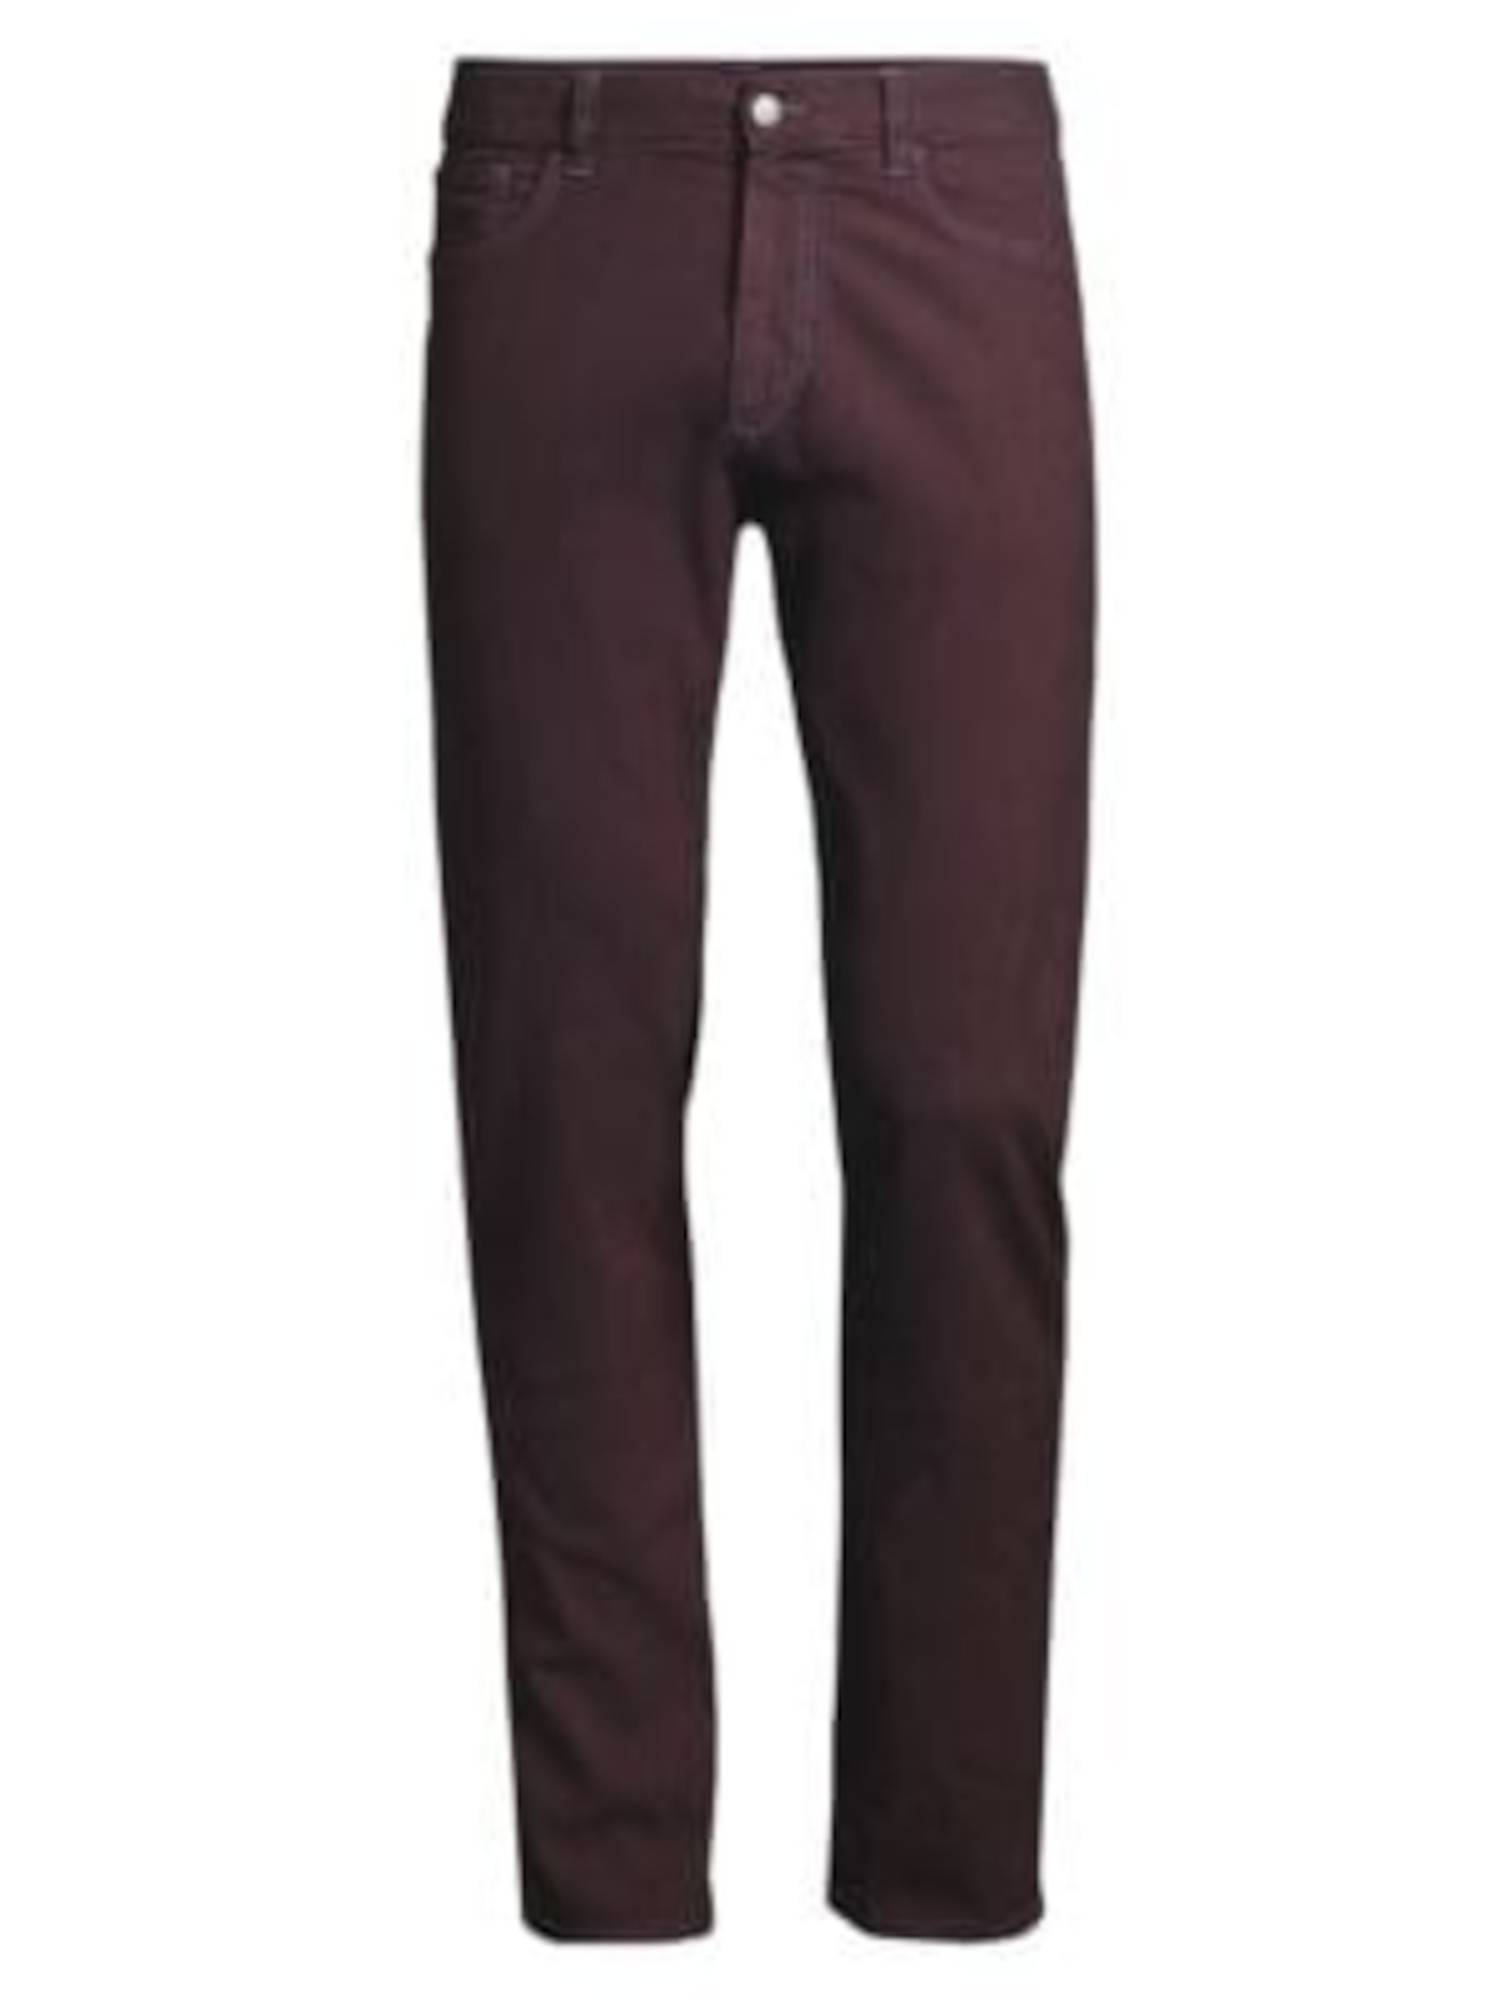 Canali Mens Burgundy Tapered, Regular Fit Chino Pants 50 36W\34L